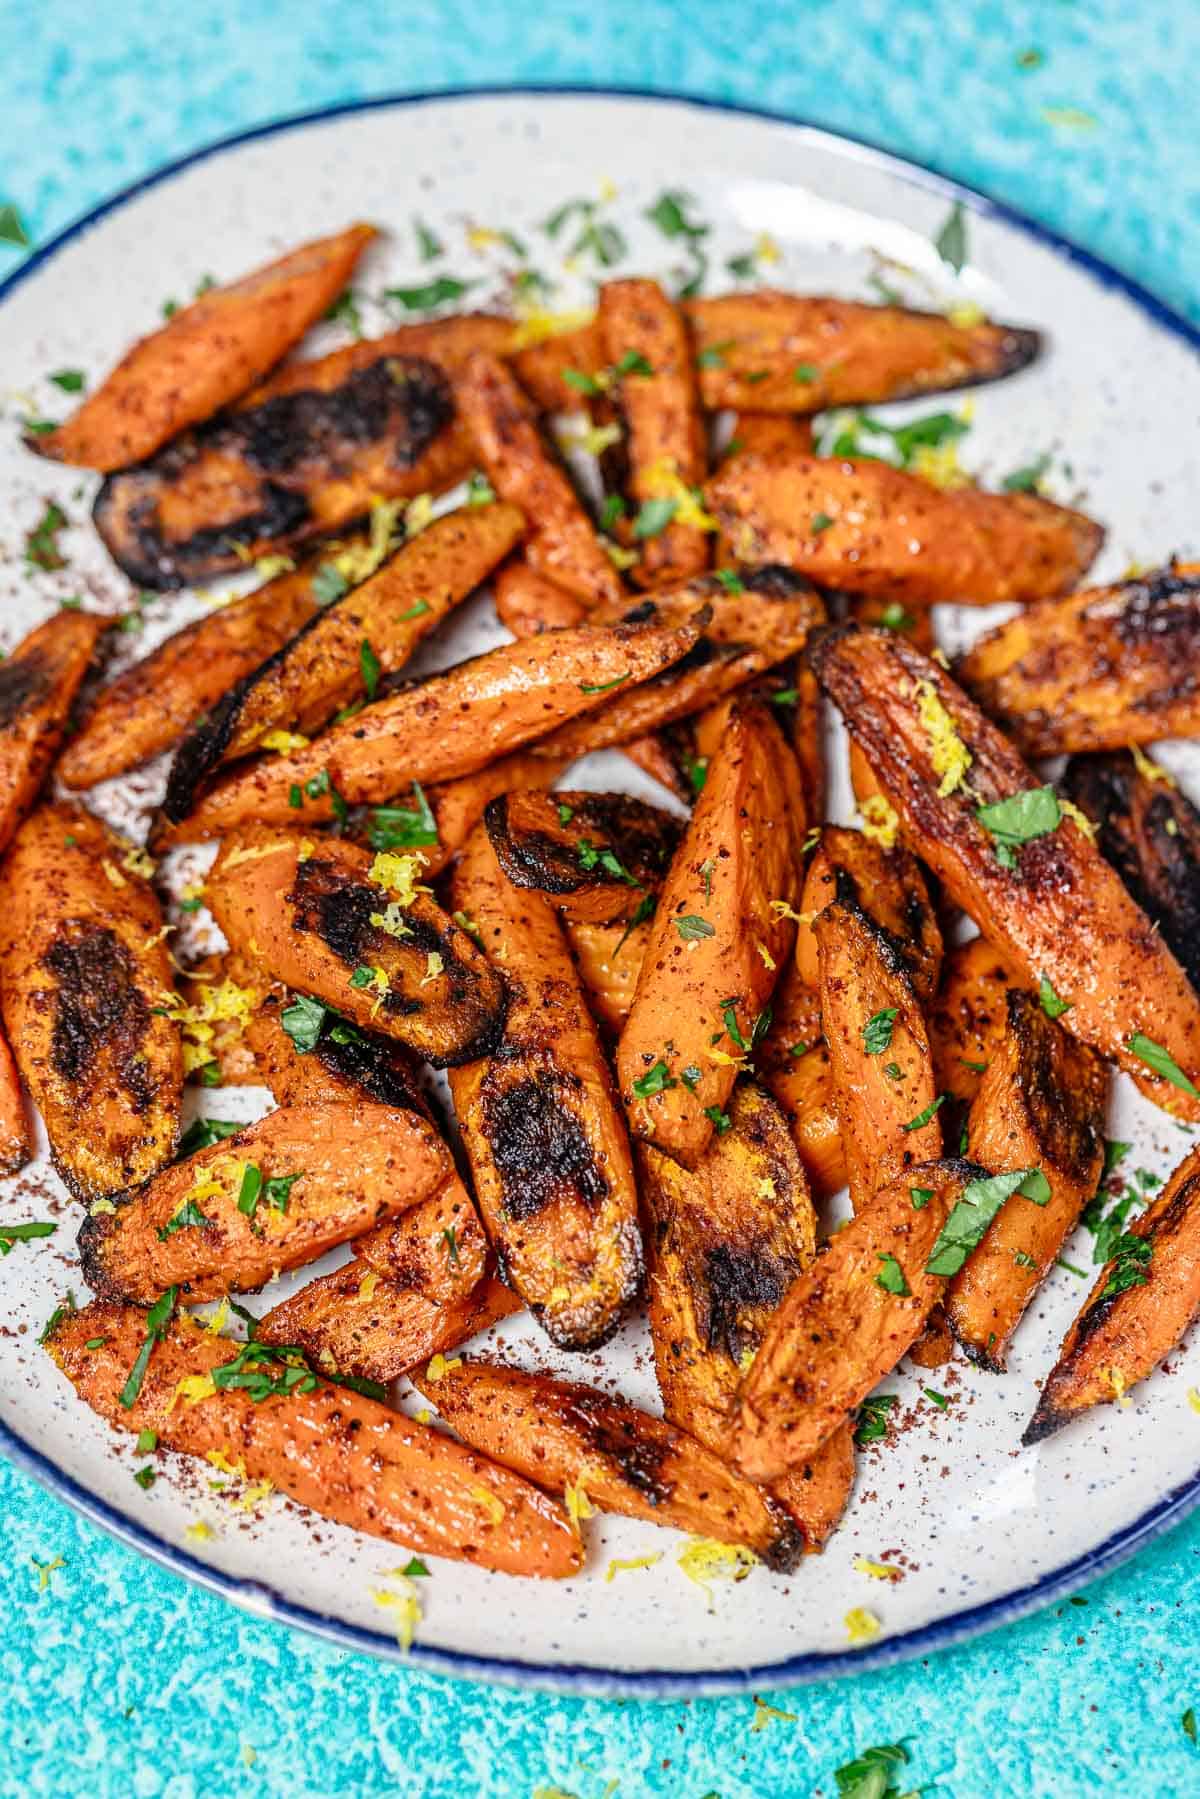 roasted carrots with sumac garnished with lemon zest and parsley on a serving plate.